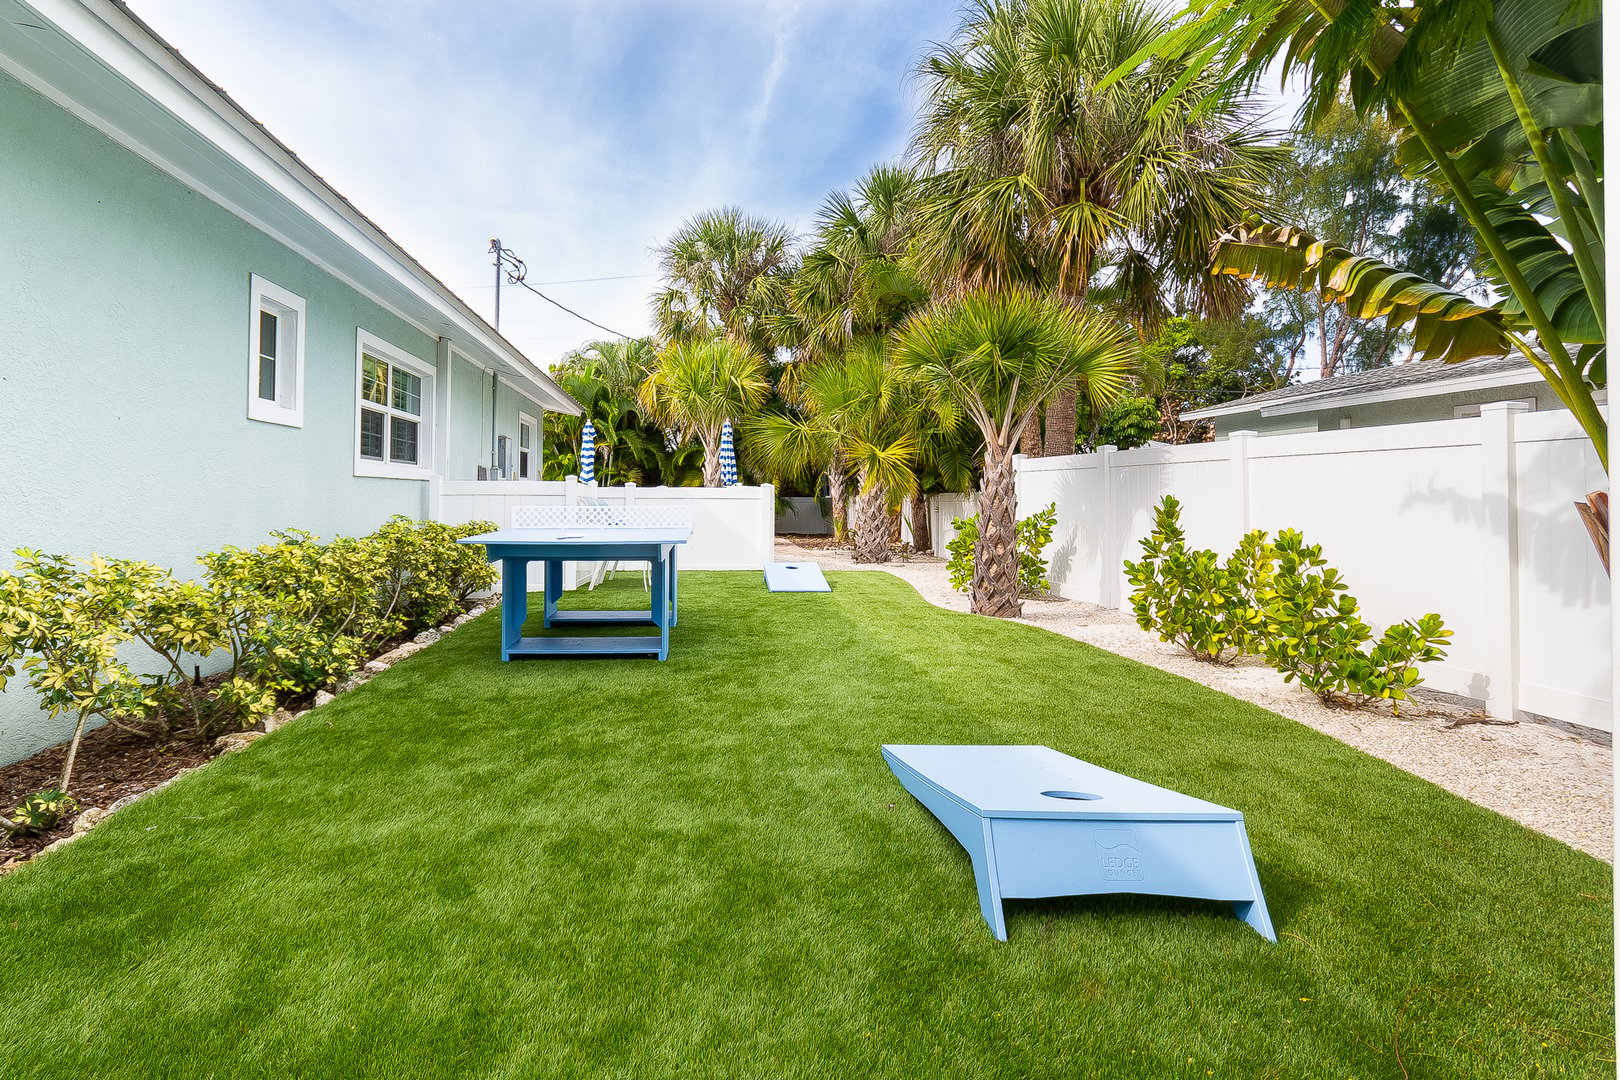 Side yard for Toes in the Water with artificial turf view towards backyard